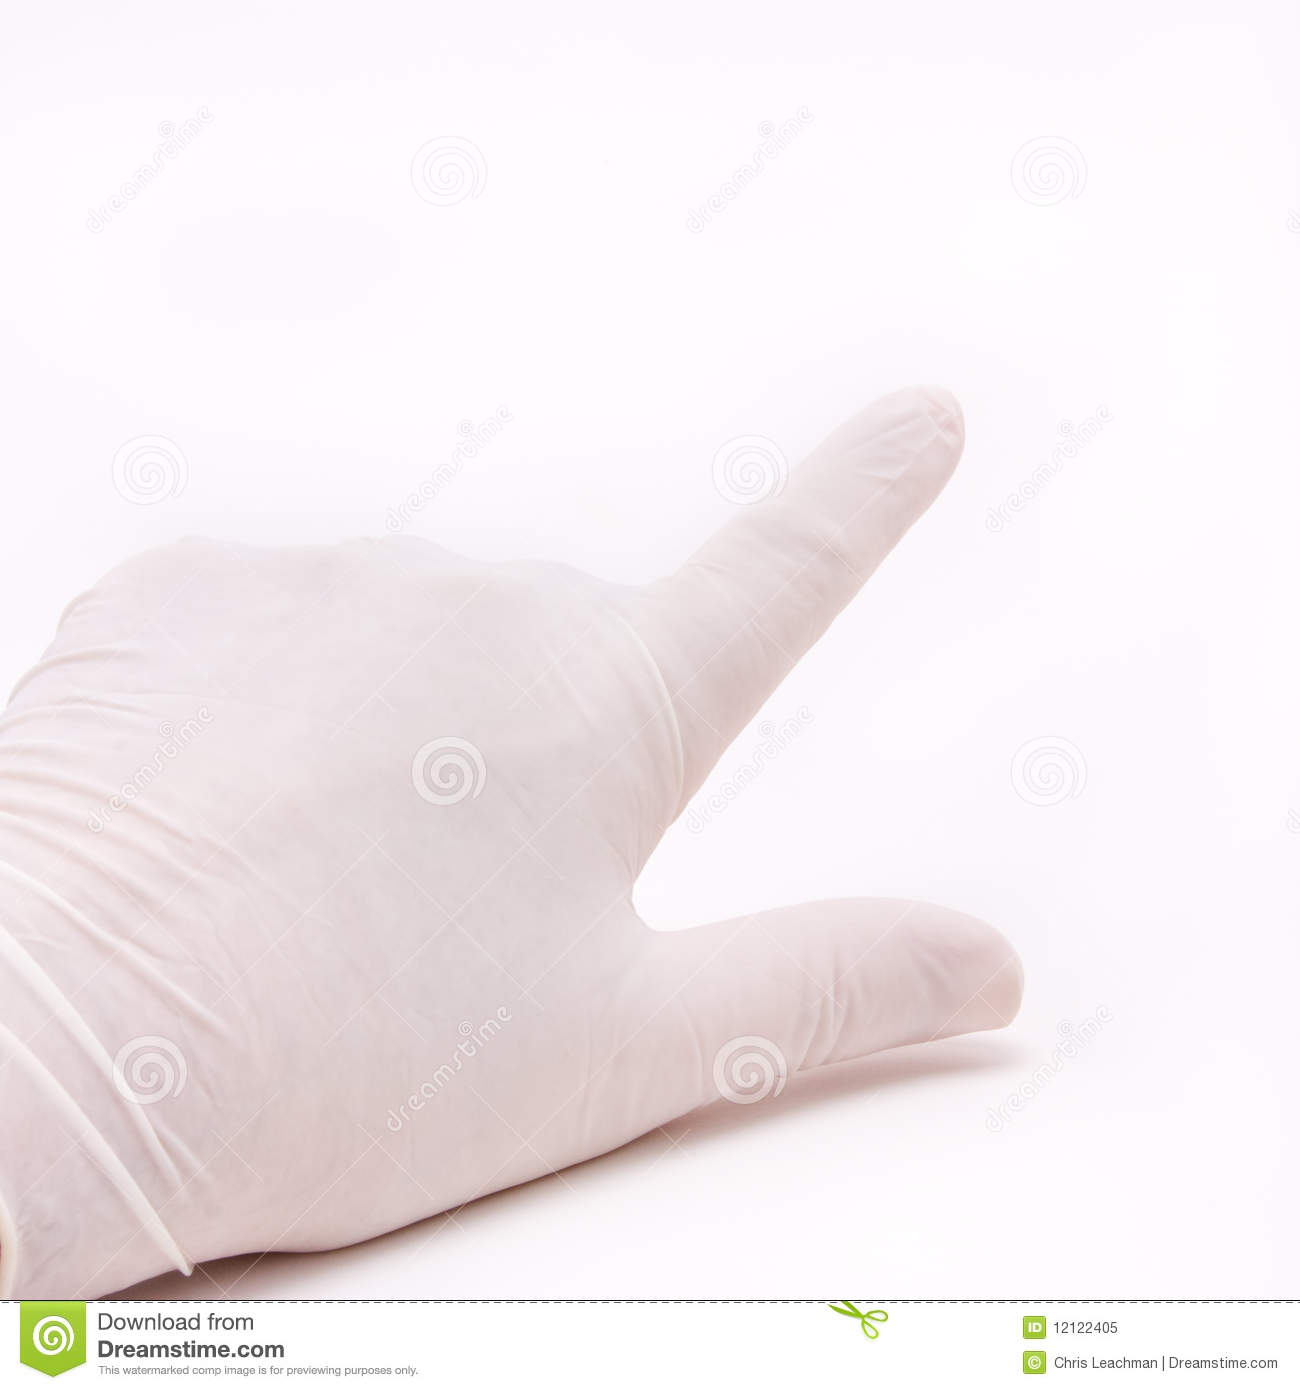 Mans Hand Gesture Wearing White Surgical Glove Against White